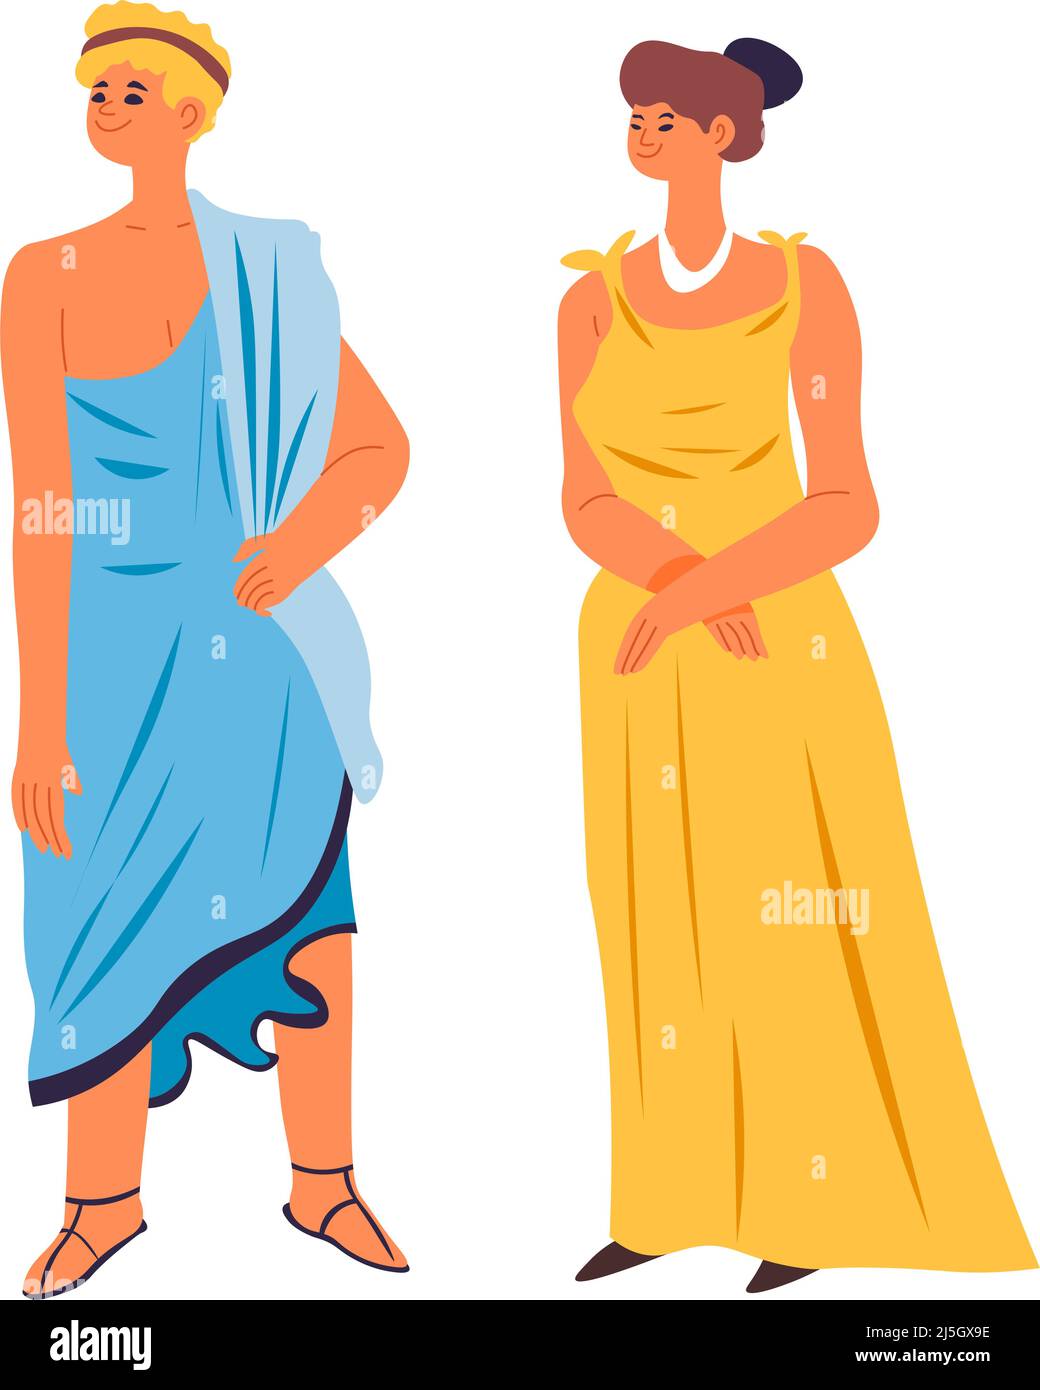 Roman toga woman Cut Out Stock Images & Pictures - Alamy